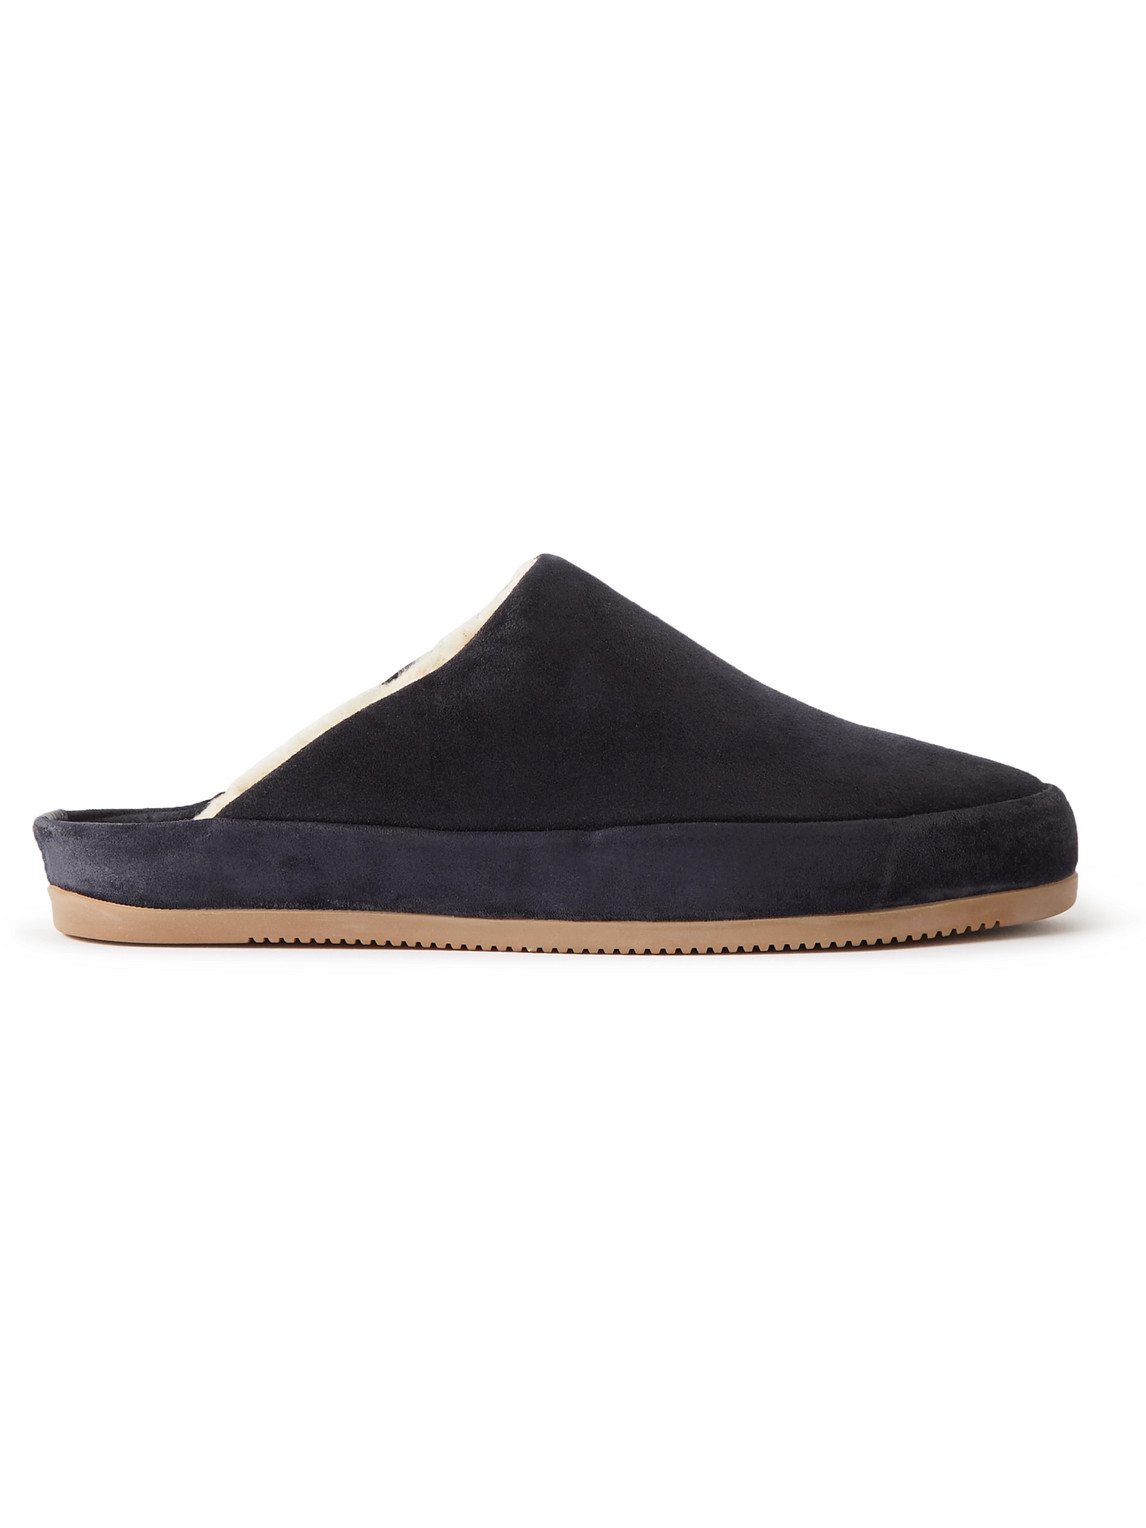 Mulo - Shearling-Lined Suede Slippers - Men - Blue - UK 6 von Mulo